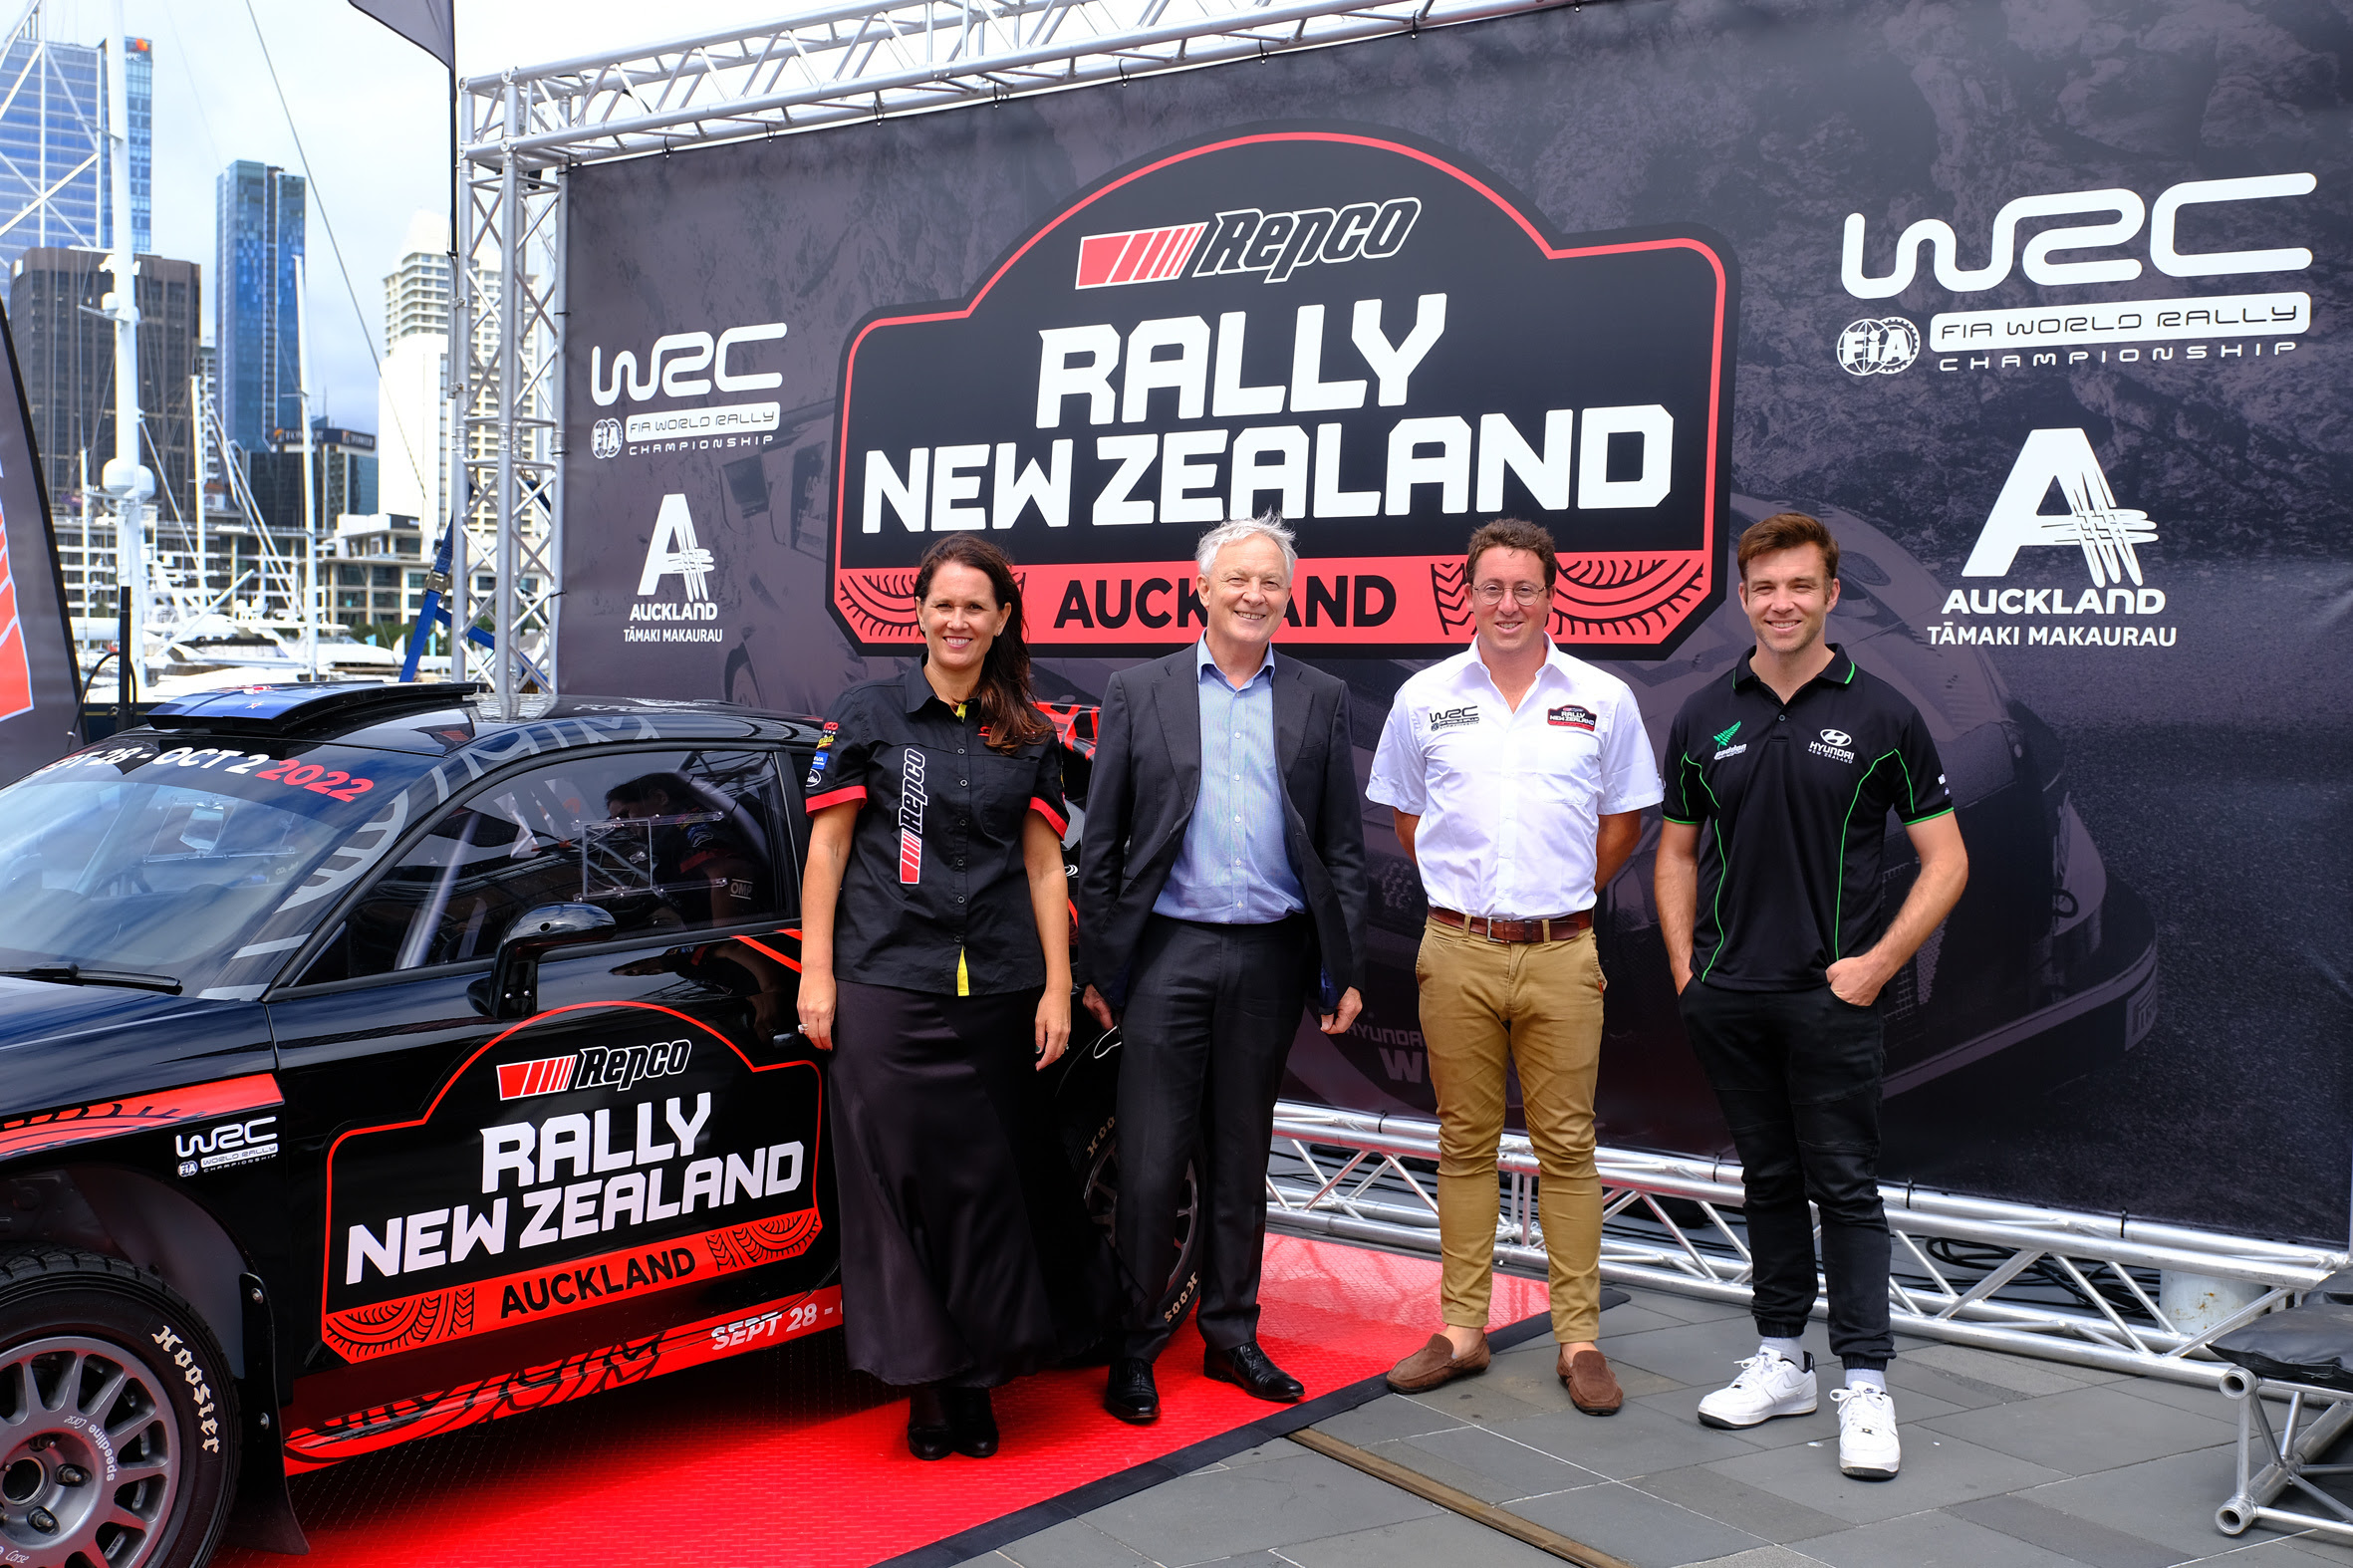 The rally’s service park and the REPCO rally village will be based on Auckland’s waterfront.